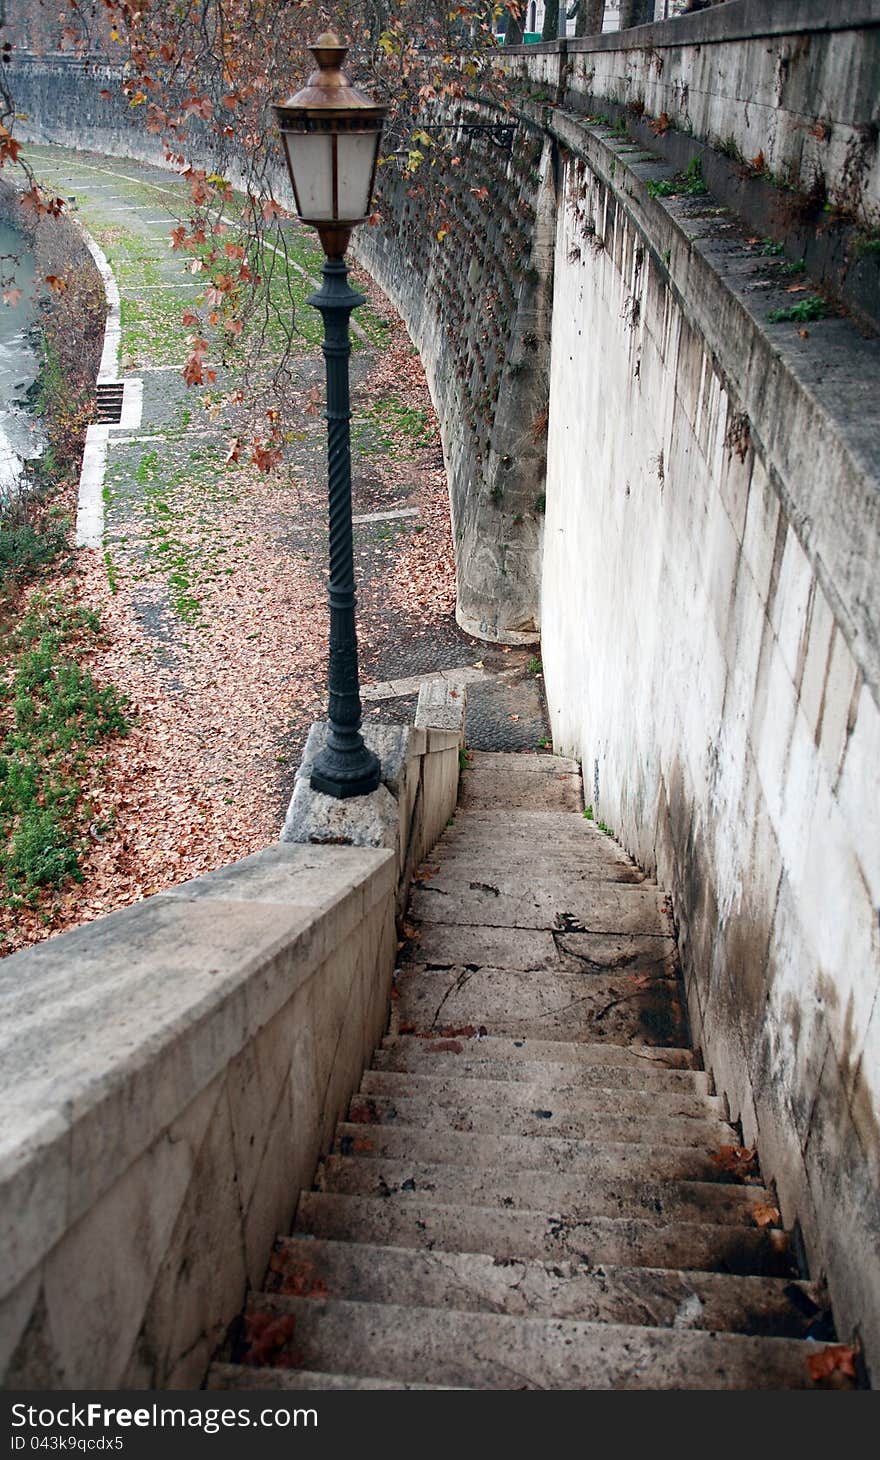 Urban scene with old stone staircase and street lamp near river